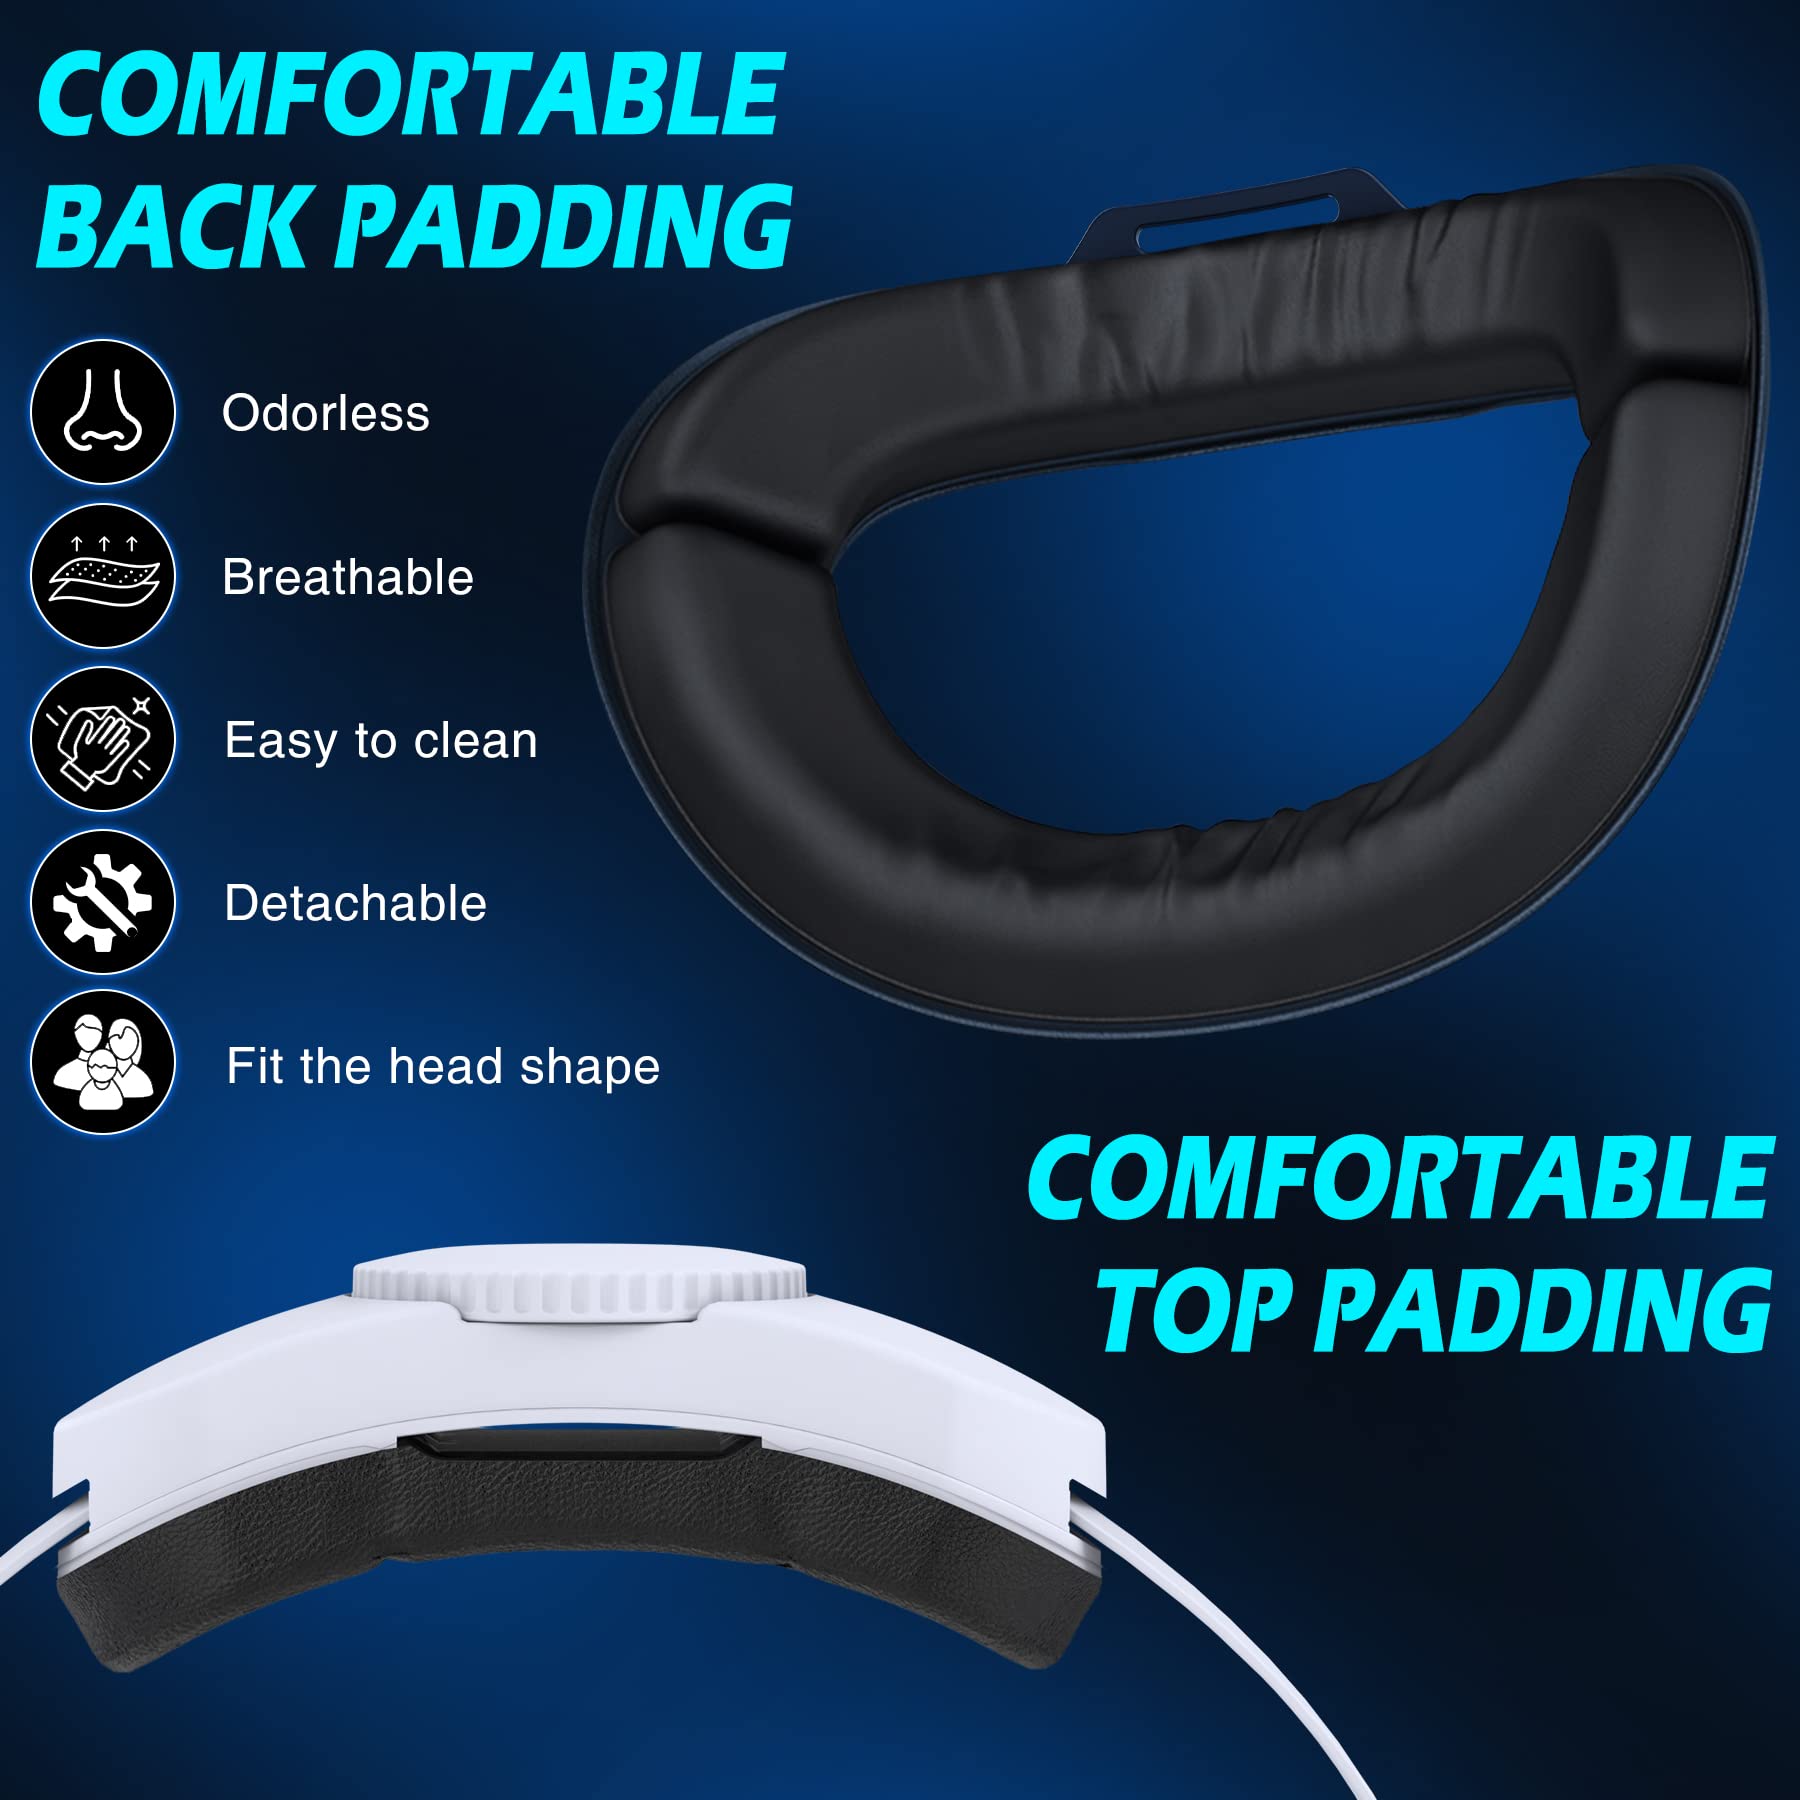 Kawaye Head Strap with 7500mAh Rechargeable Battery Compatible with Meta Quest 2, Double Knob Comfortable Head Strap for Meta/Oculus Quest 2, Enhanced Support & Comfort Head Strap Accessories, MQ2001